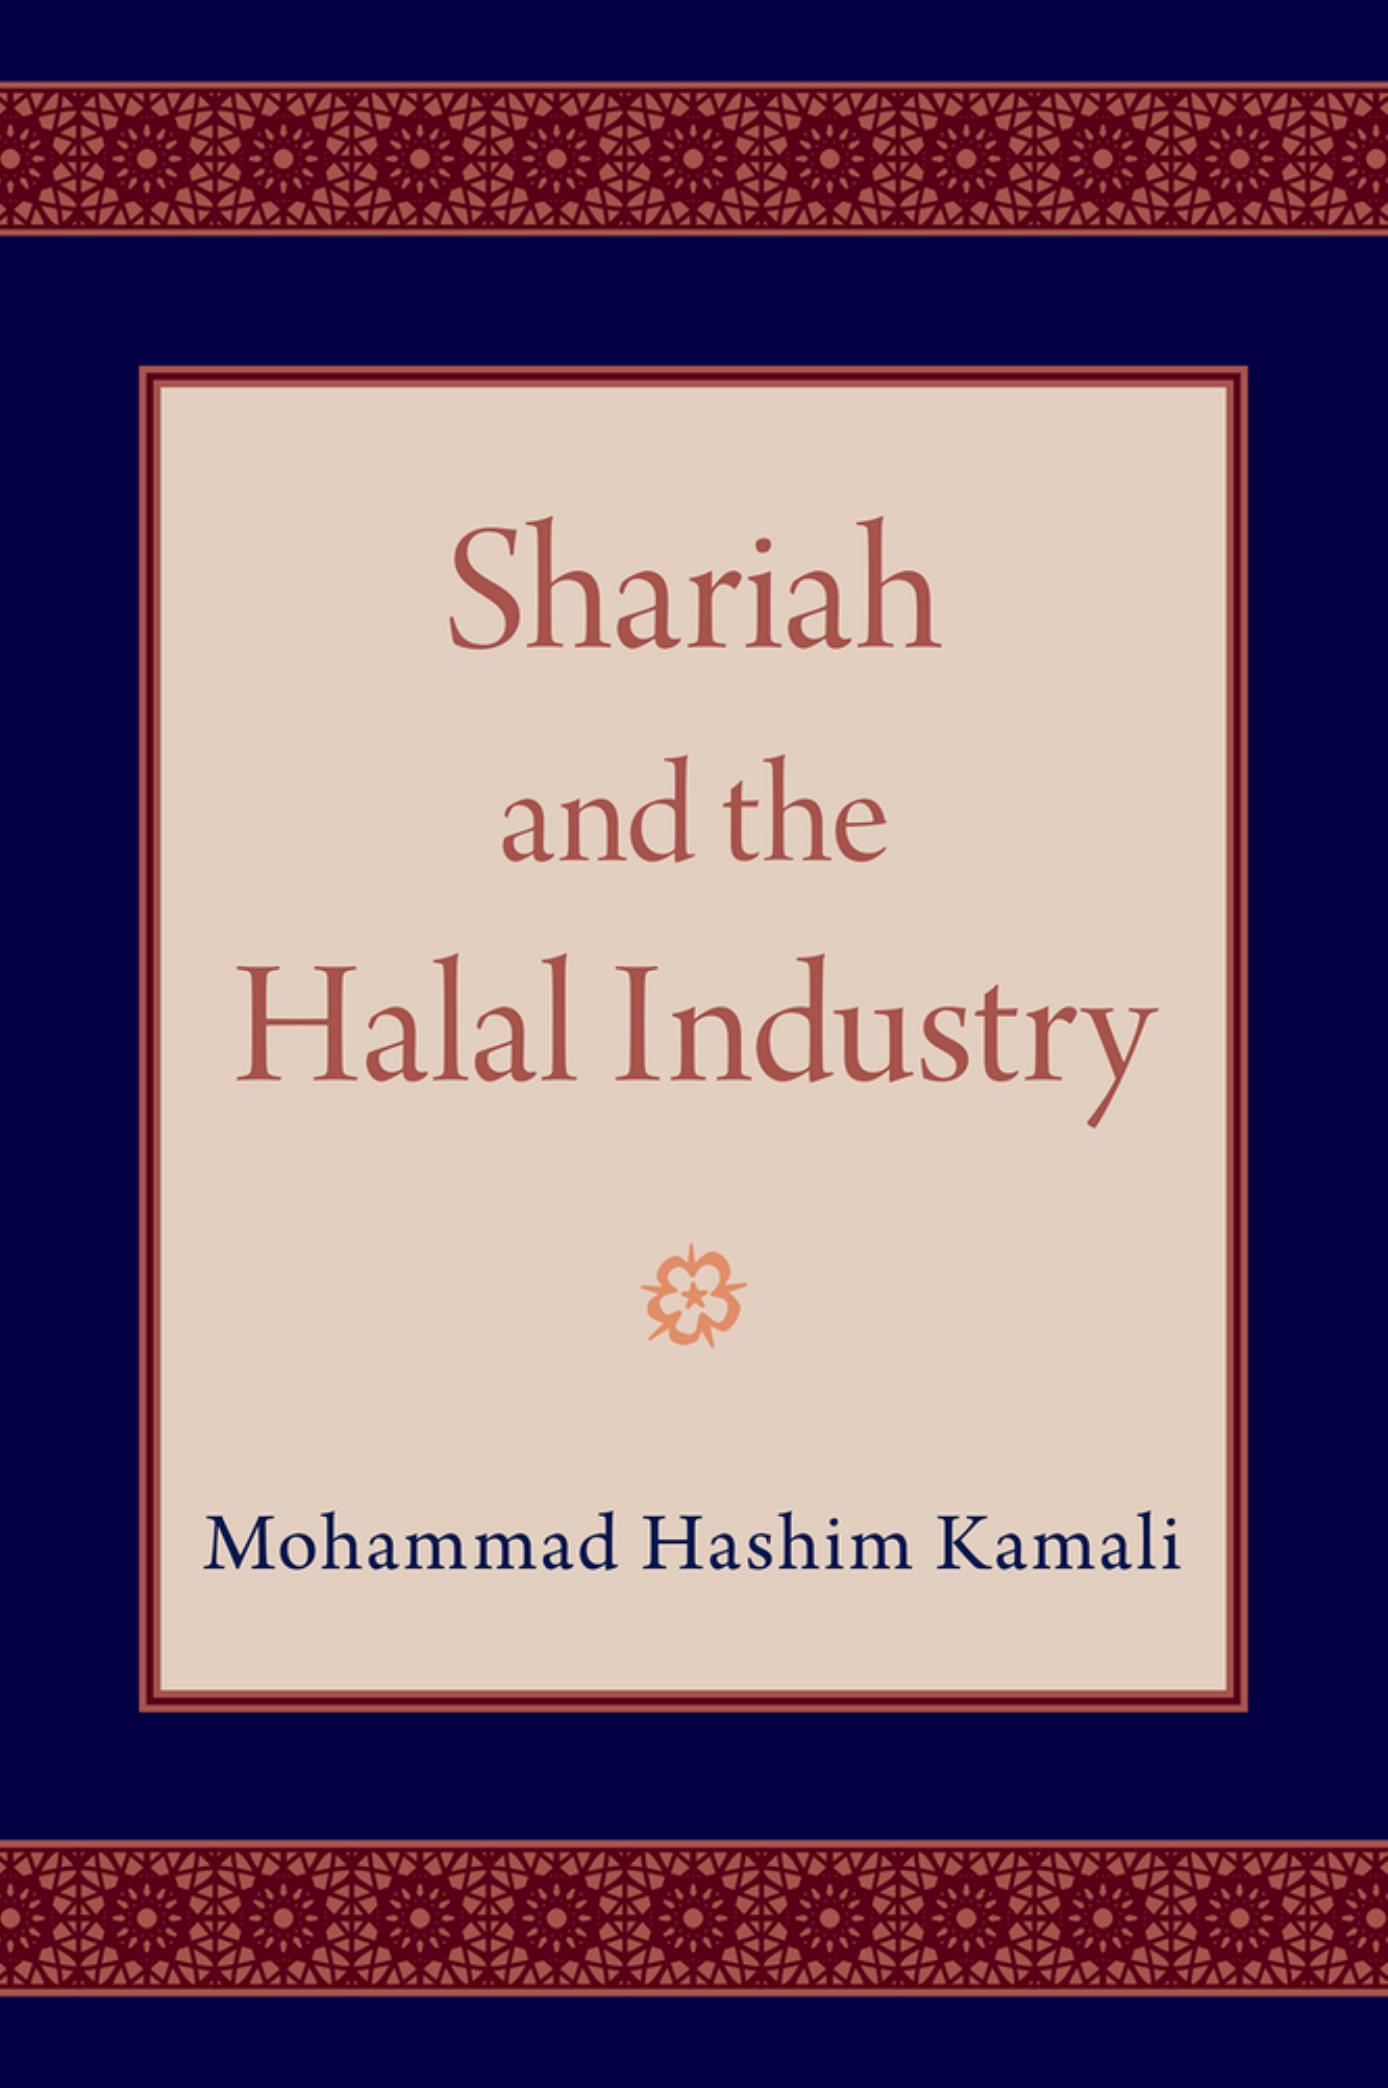 Shariah and the Halal Industry 1st Edition by Mohammad Hashim Kamali 